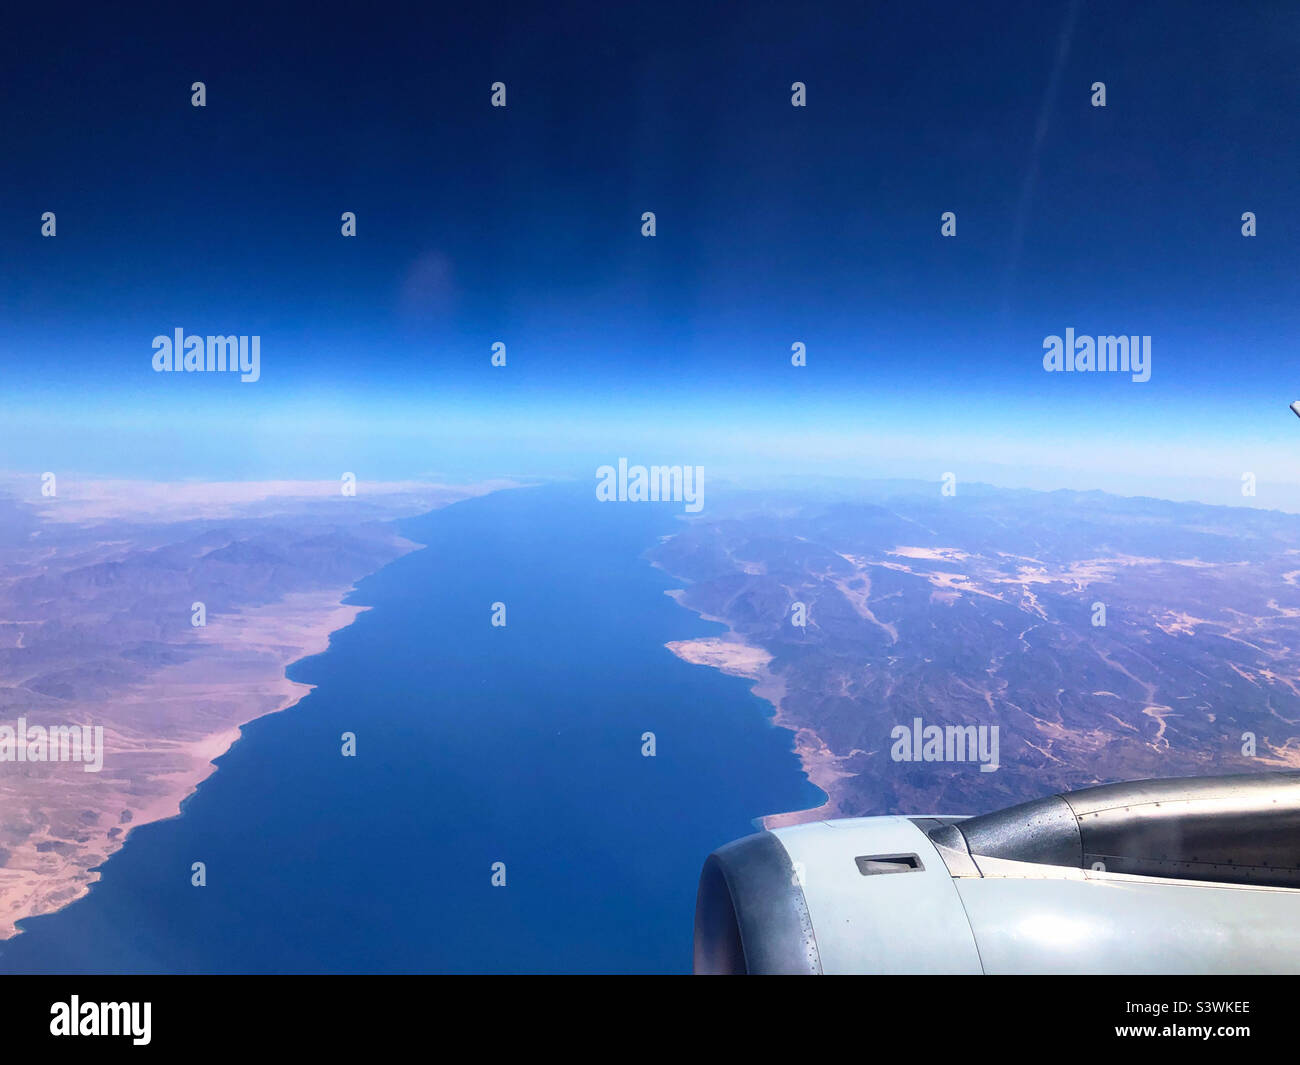 The Gulf of Aqaba (Gulf of Eilat) from the air showing Egypt to the left and Jordan and Saudi Arabia to the right. Stock Photo